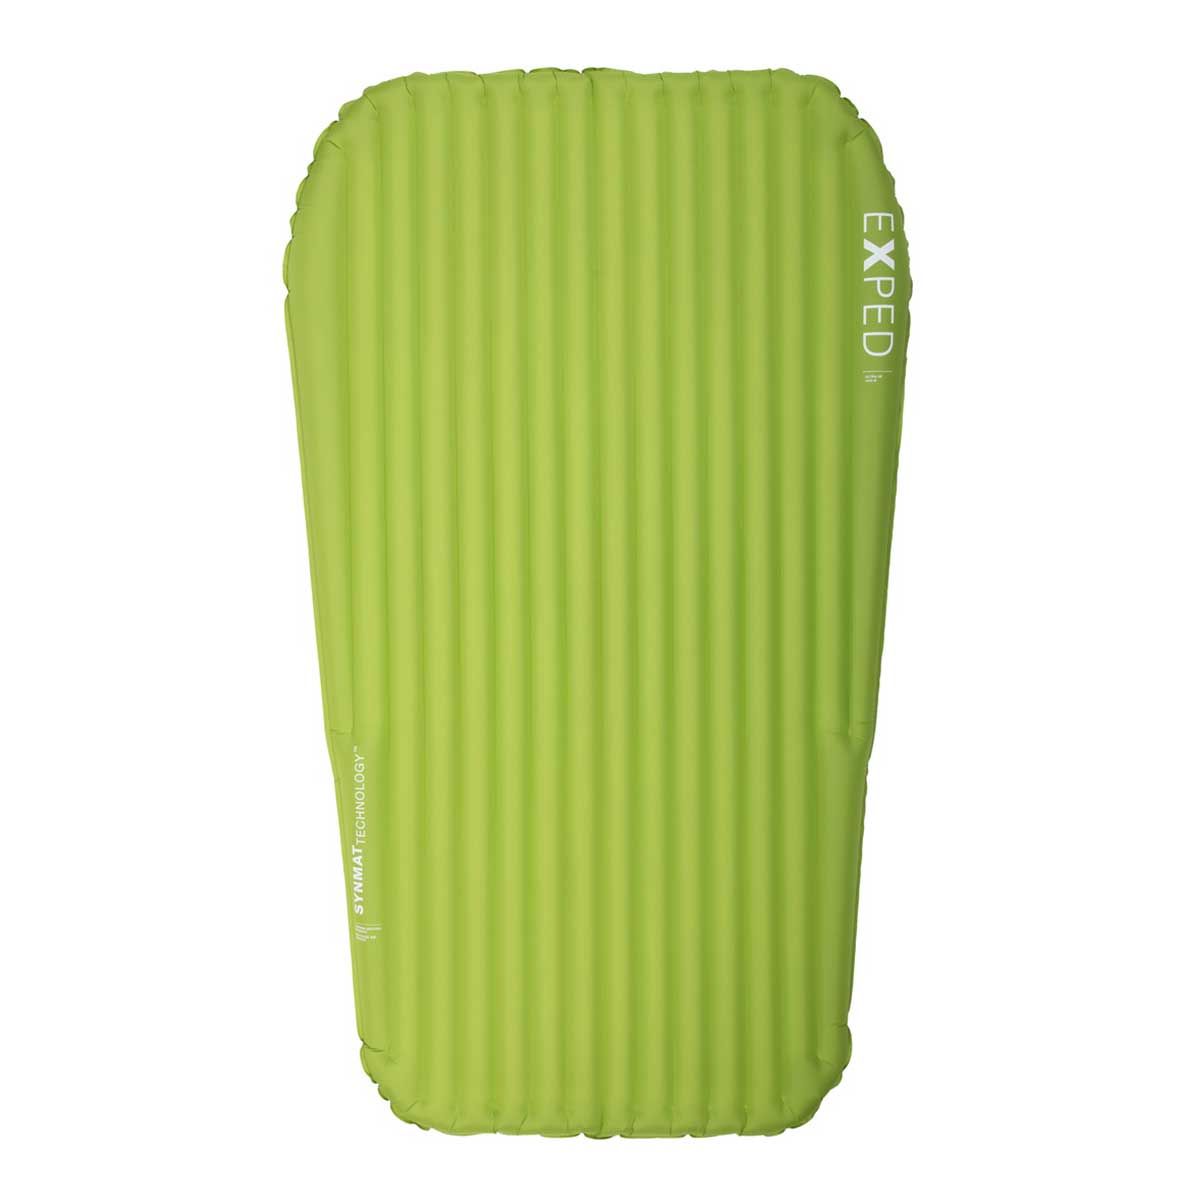 Exped Dura 3R Duo inflatable sleeping pad 